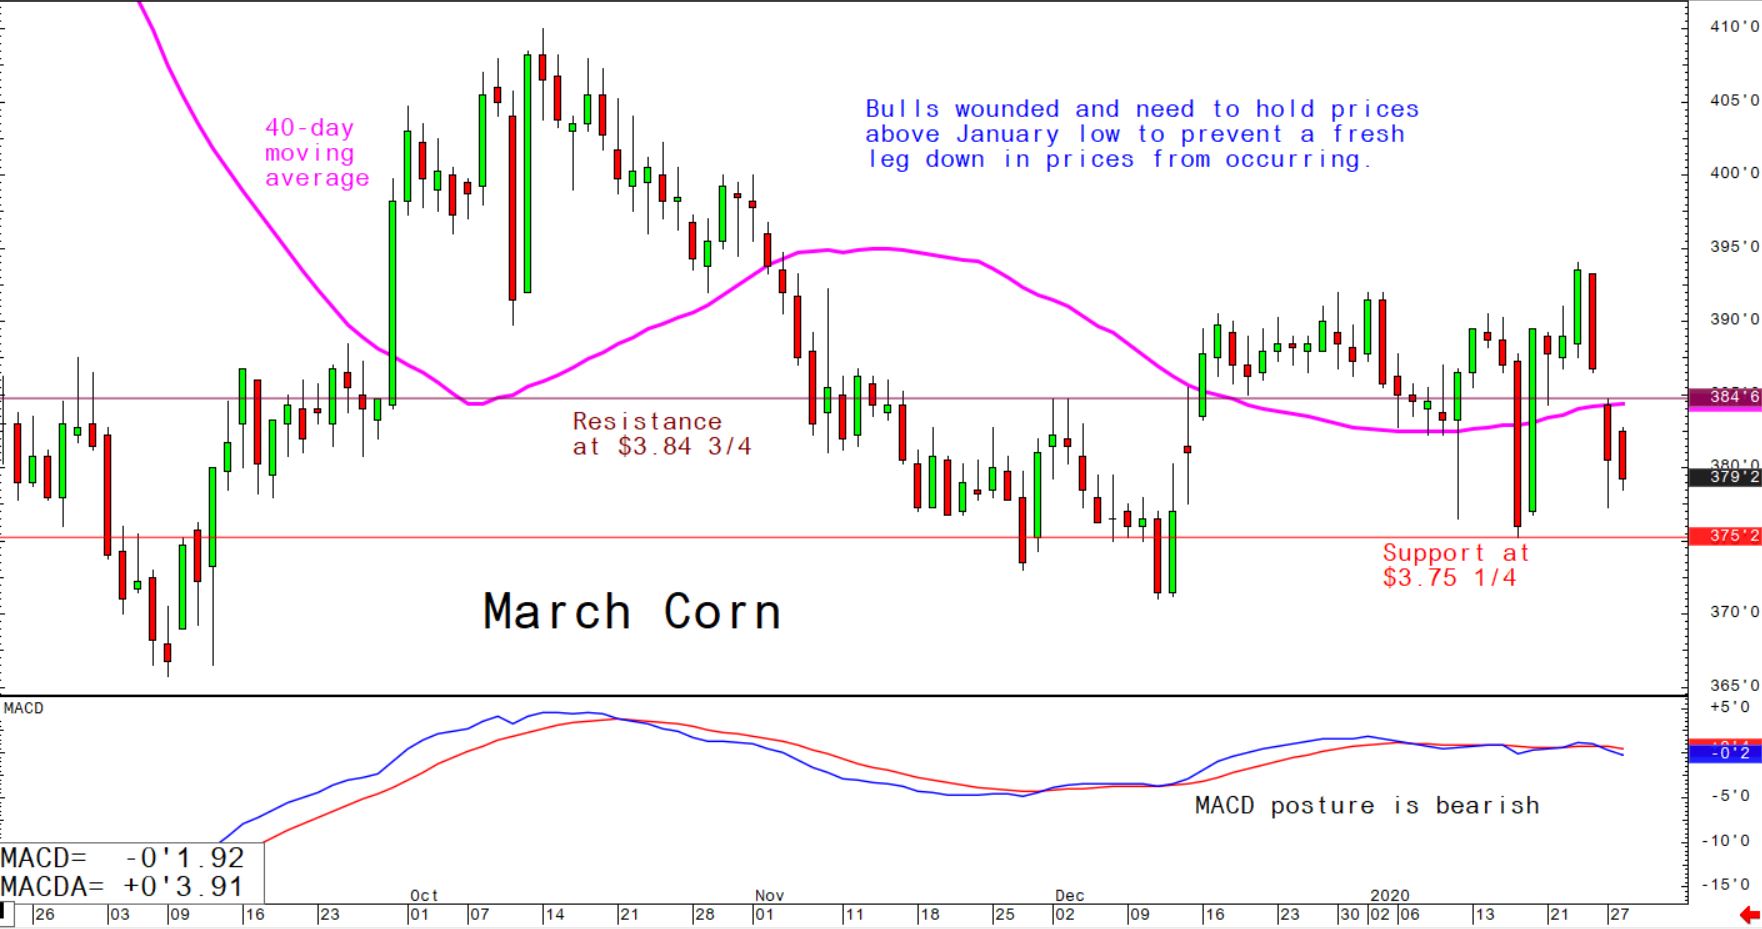 Bulls wounded and need to hold prices above January low to prevent a fresh leg down in prices from occurring